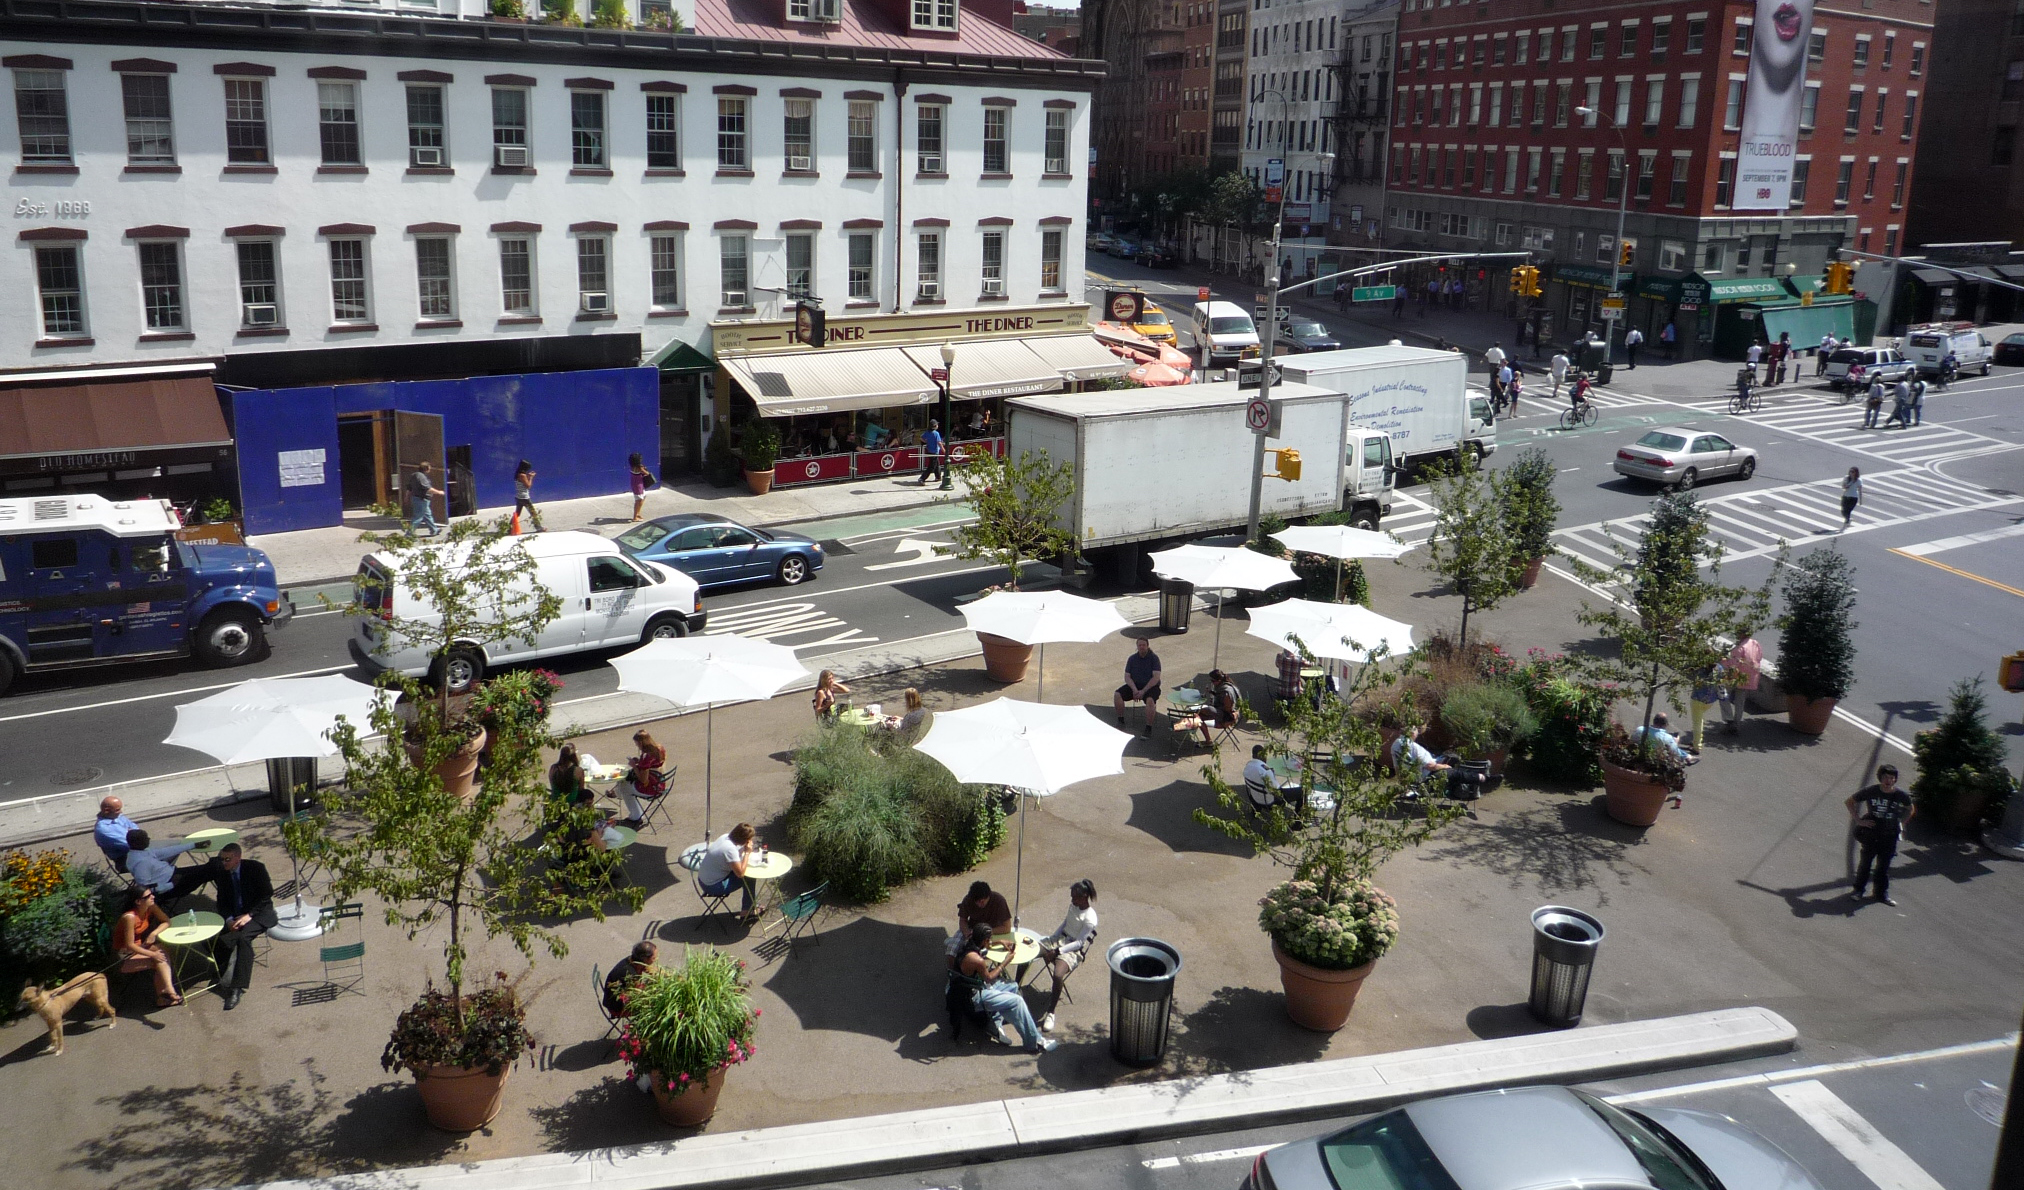 A pedestrian plaza with chairs and tables.